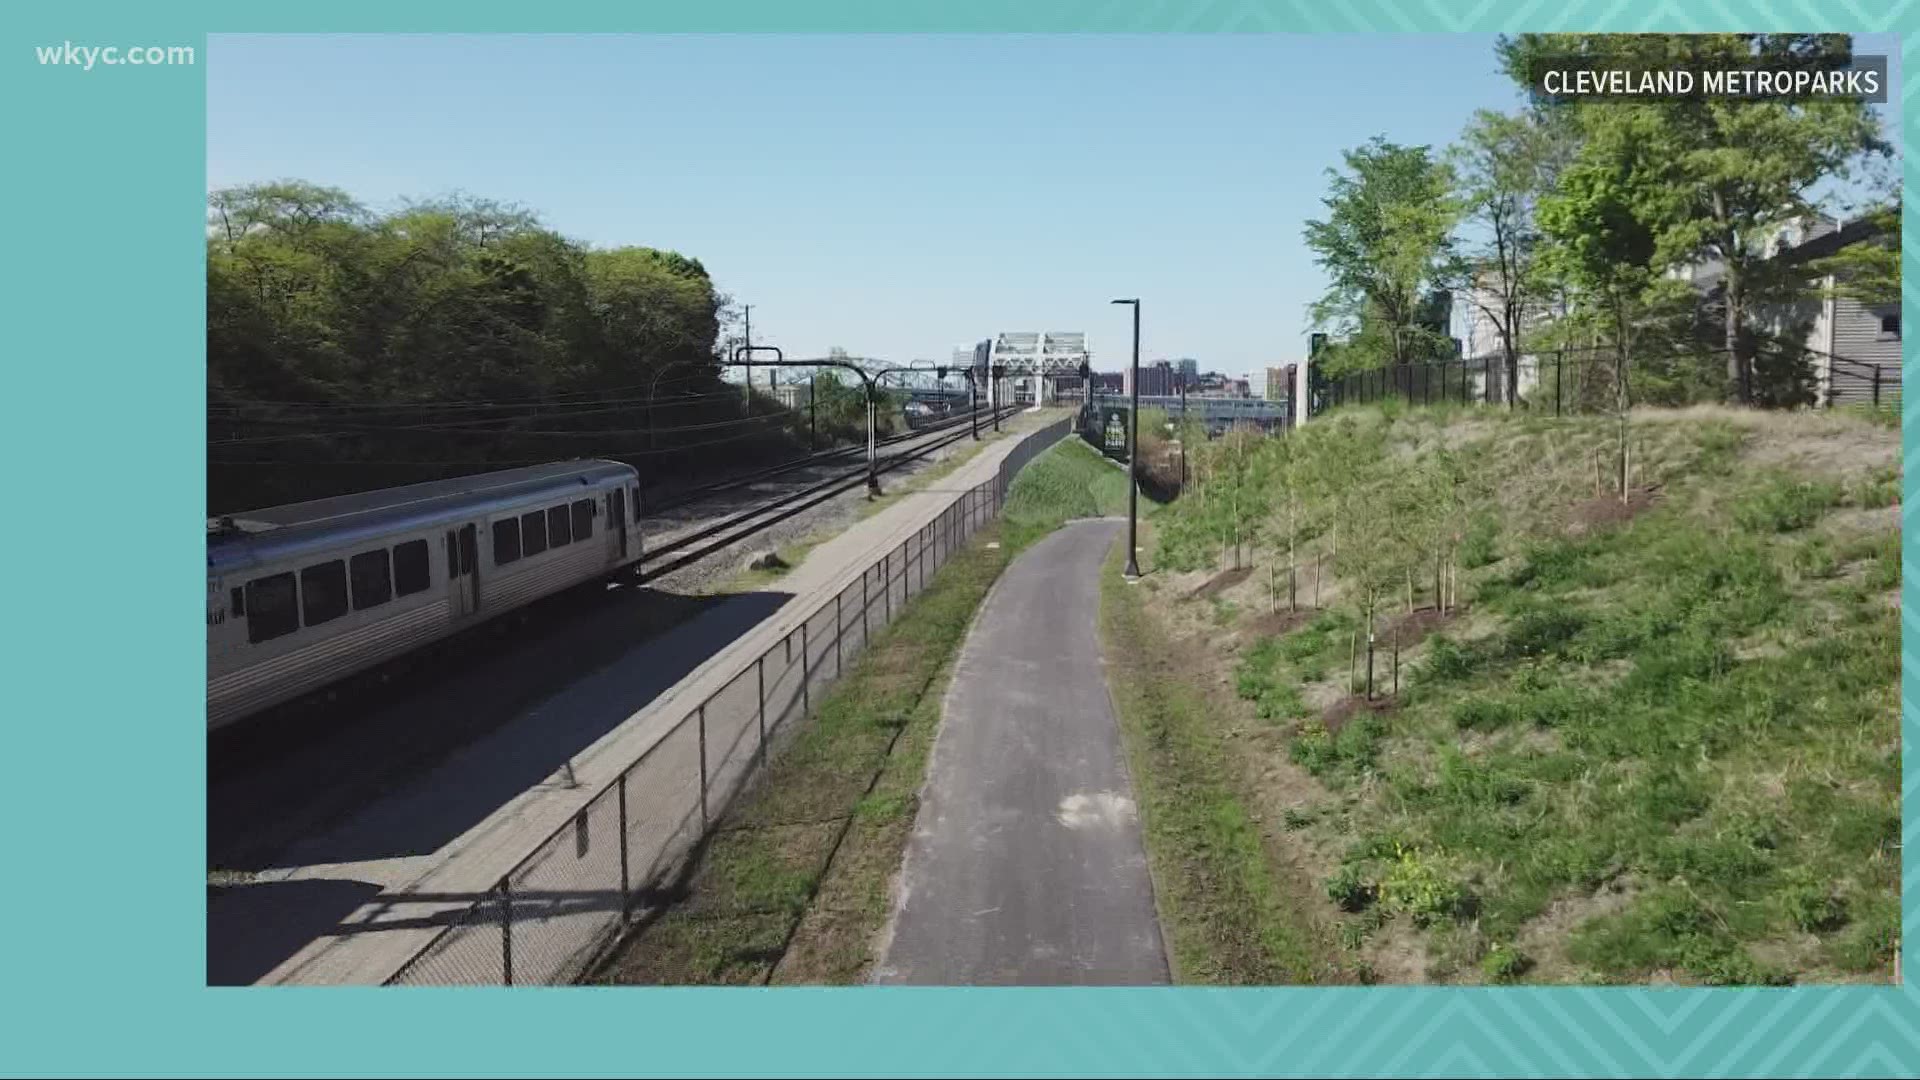 The Metroparks Trail expansion is drawing mixed reaction from residents. Metroparks have been focusing on connectivity of parks & trails around the city and region,